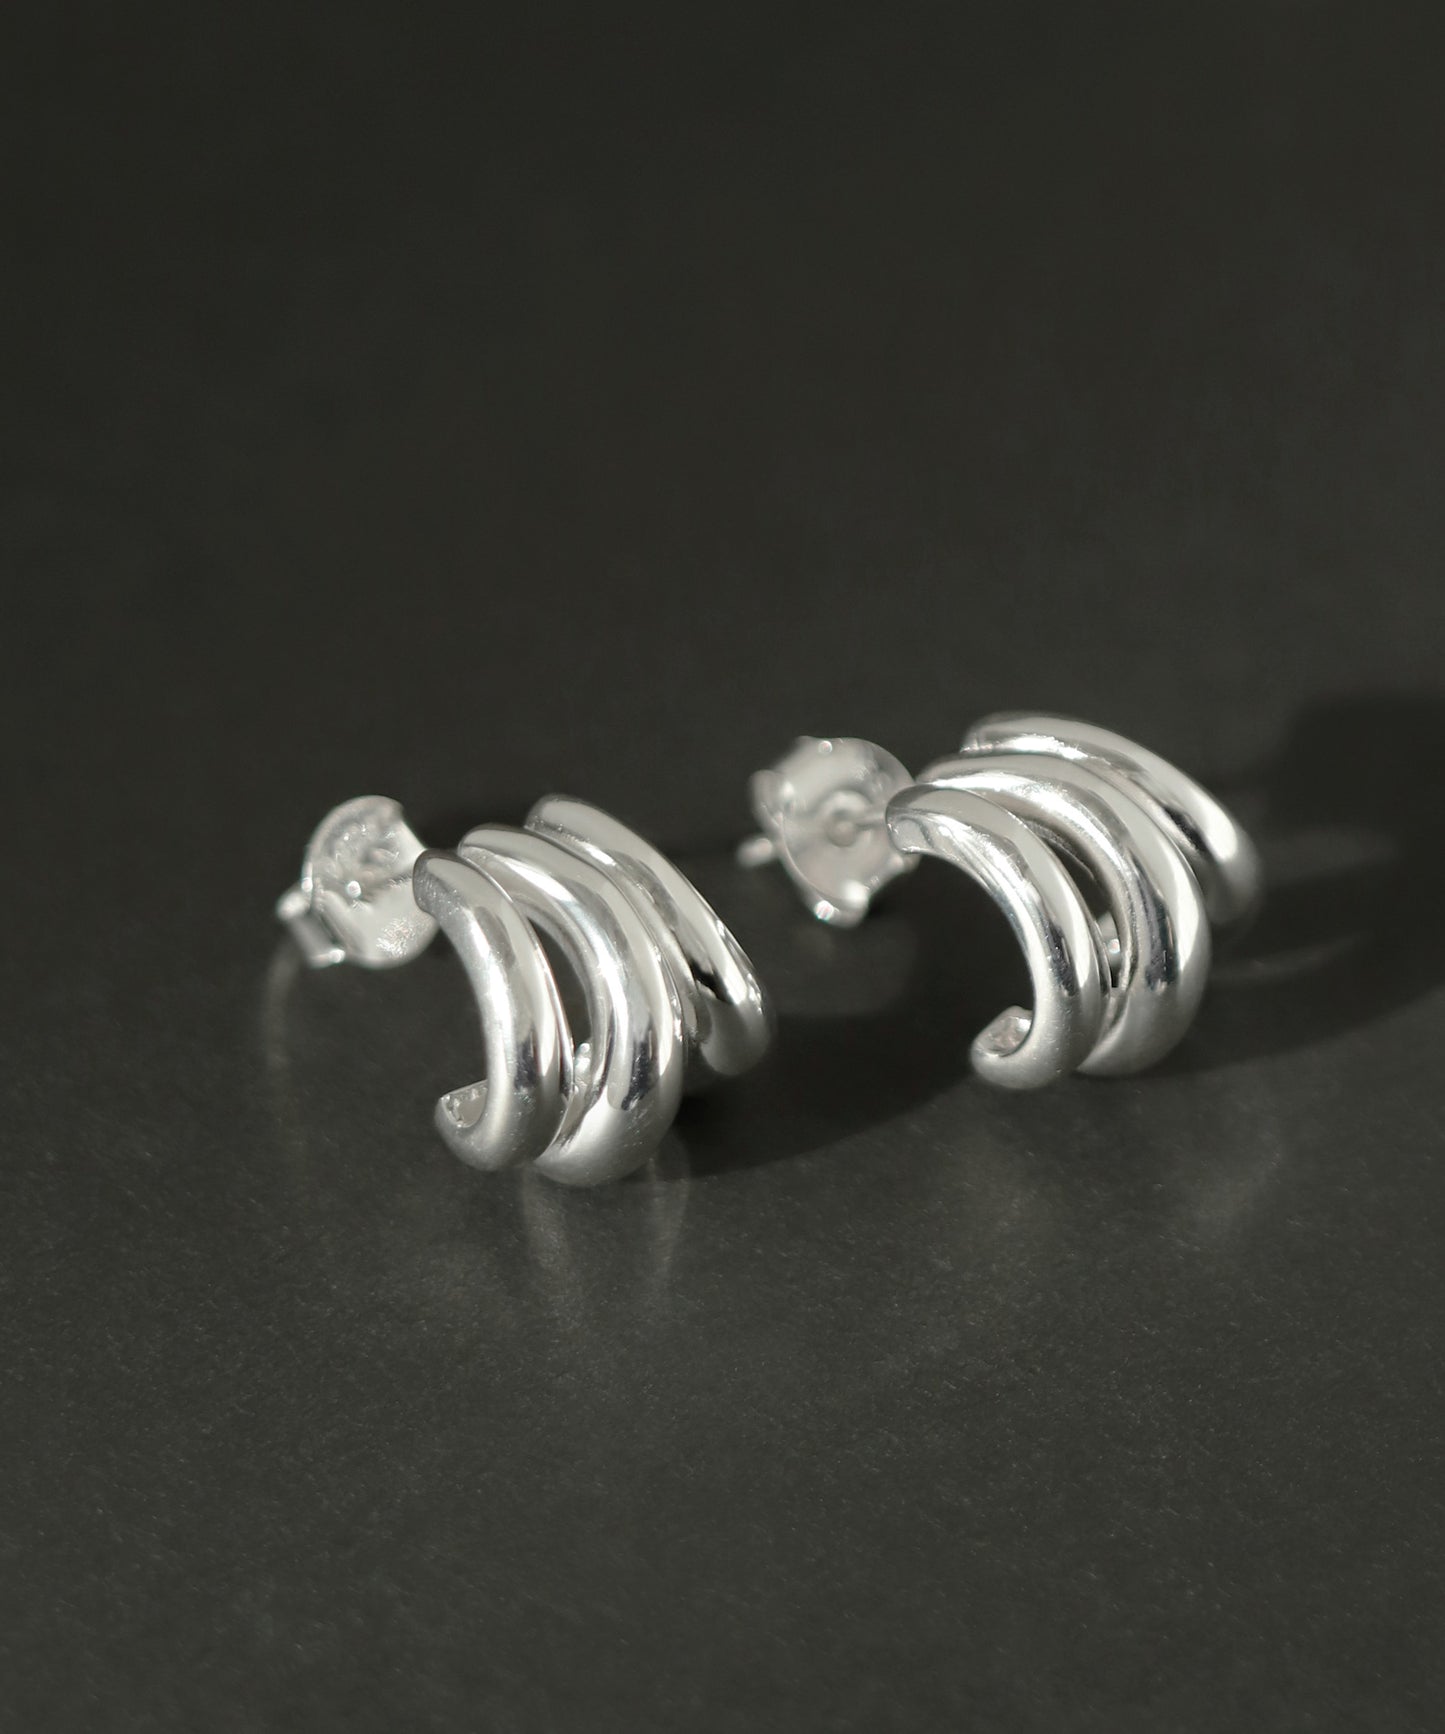 【Eligible for Novelty】Vintage Earrings [925 silver][B]